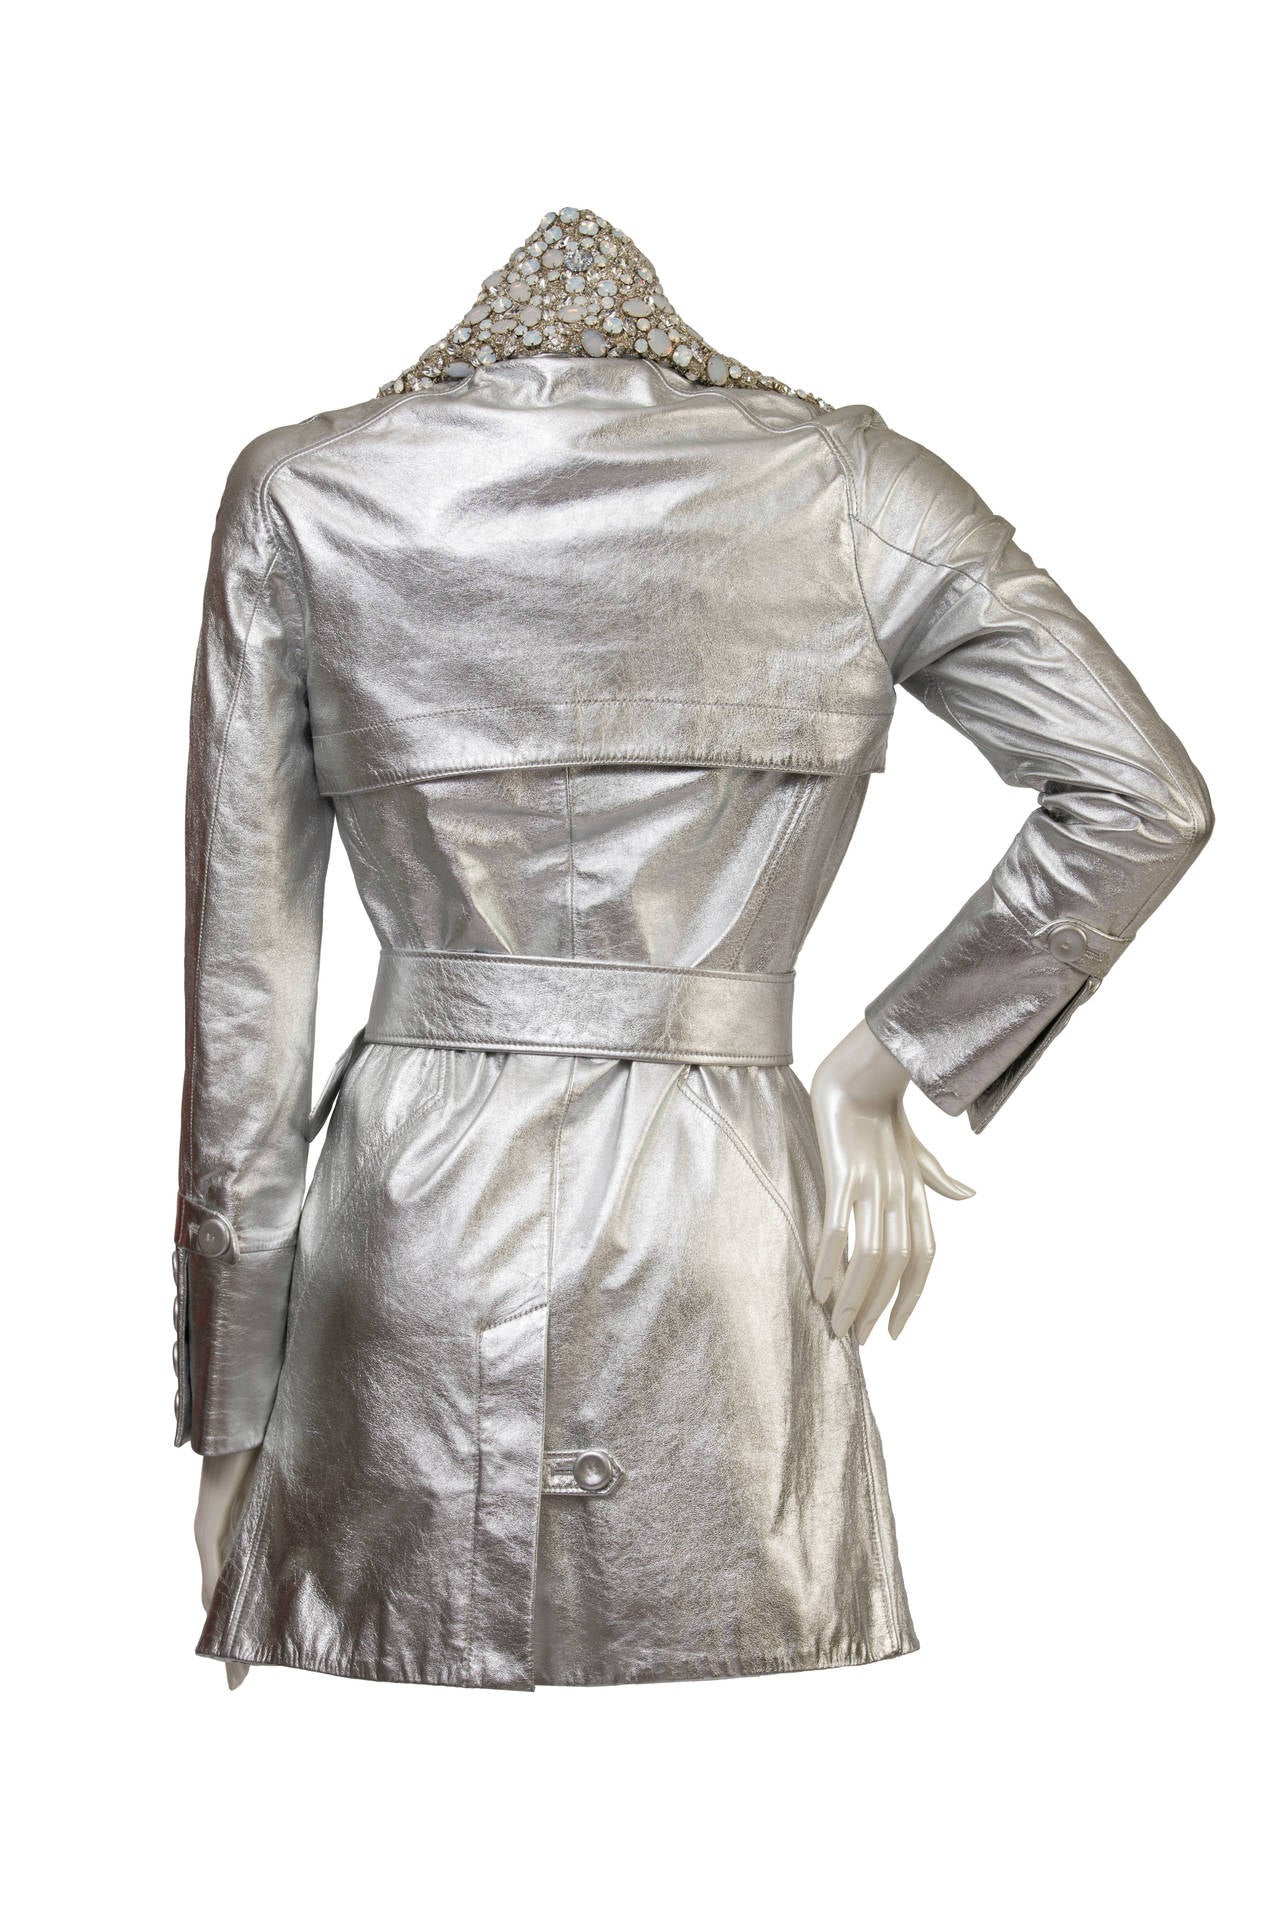 1990s John Galliano Silver Metallic Jacket With Swarovski all over the neck. 

Made In Italy

Italian size 42
French Size 38
Usa Size: 6